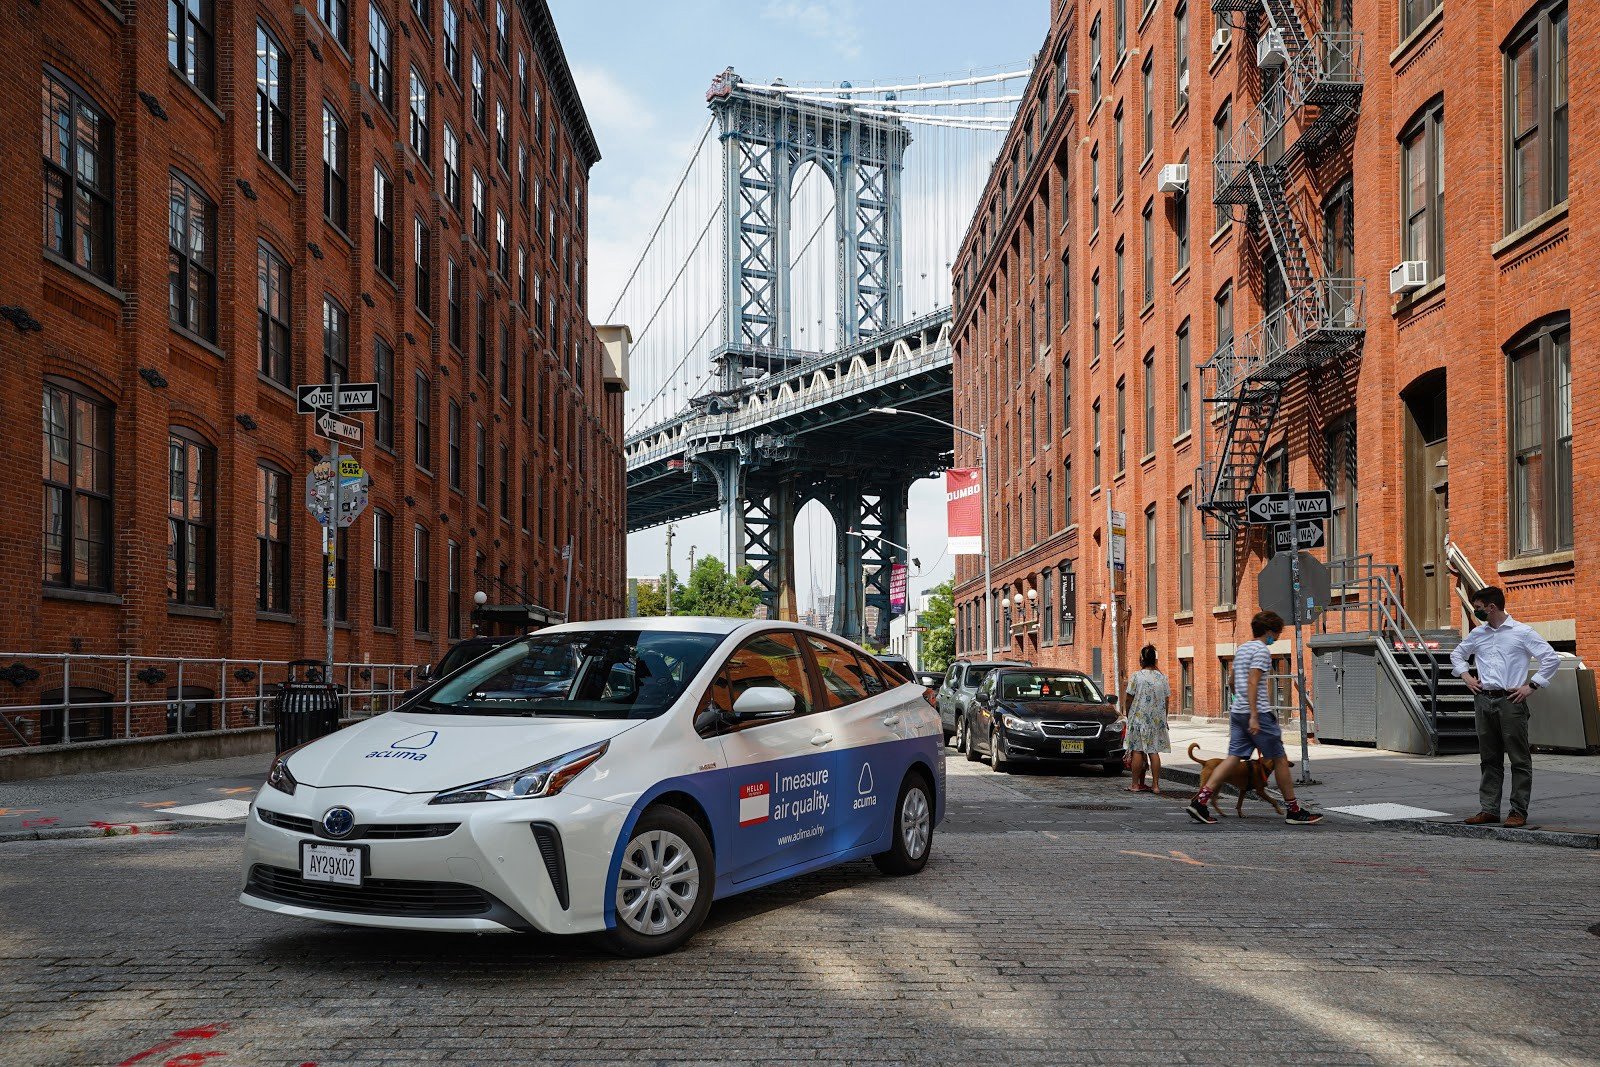 Aclima mobile air quality sensing vehicle in Brooklyn, Summer 2020. (Photo credit: Newlab)